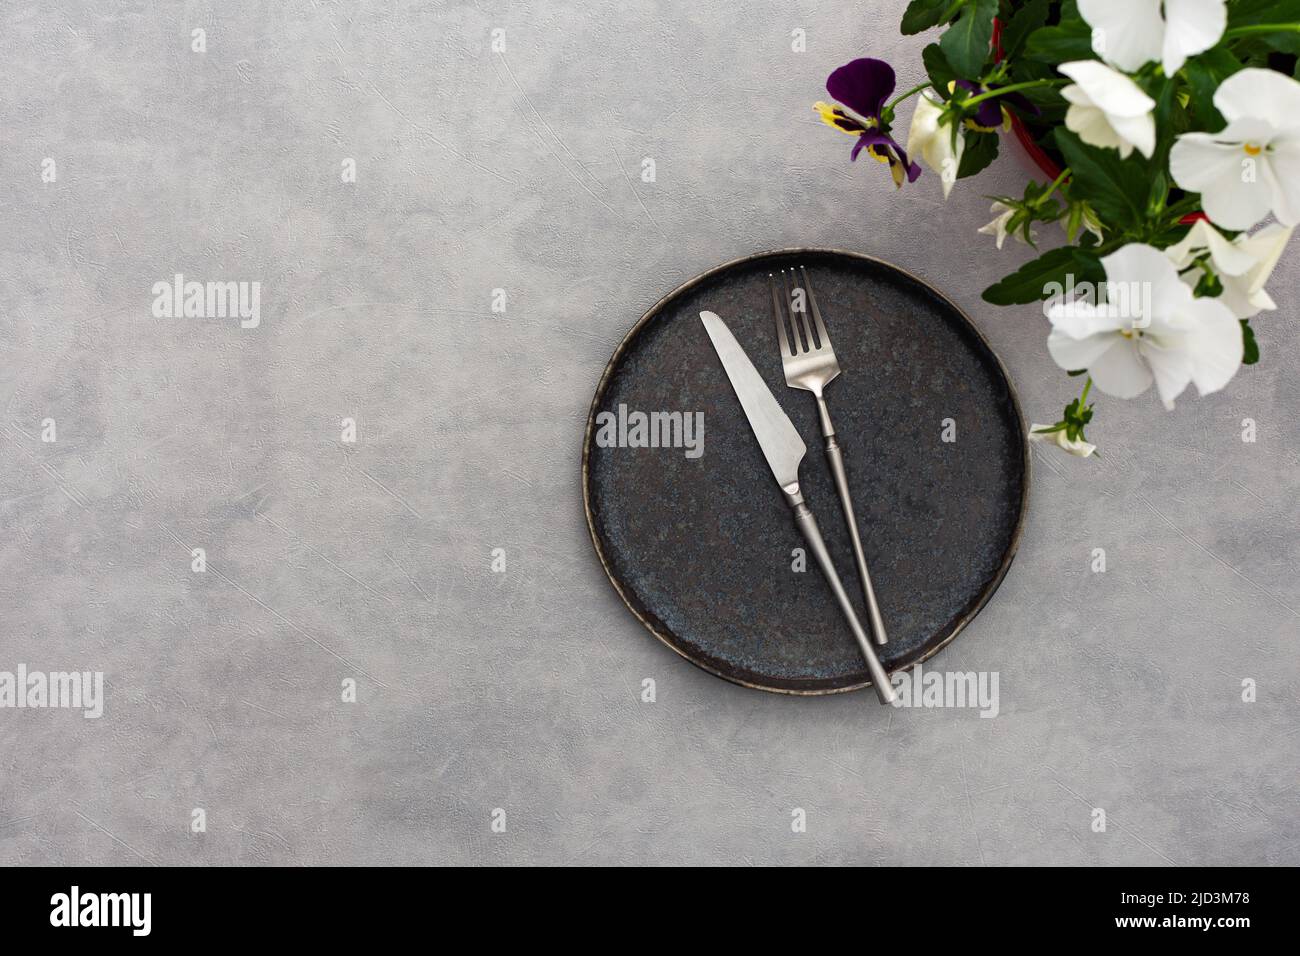 Table setting, empty plate and cutlery on the gray background, top view of the served table decorated with pansies flowers Stock Photo